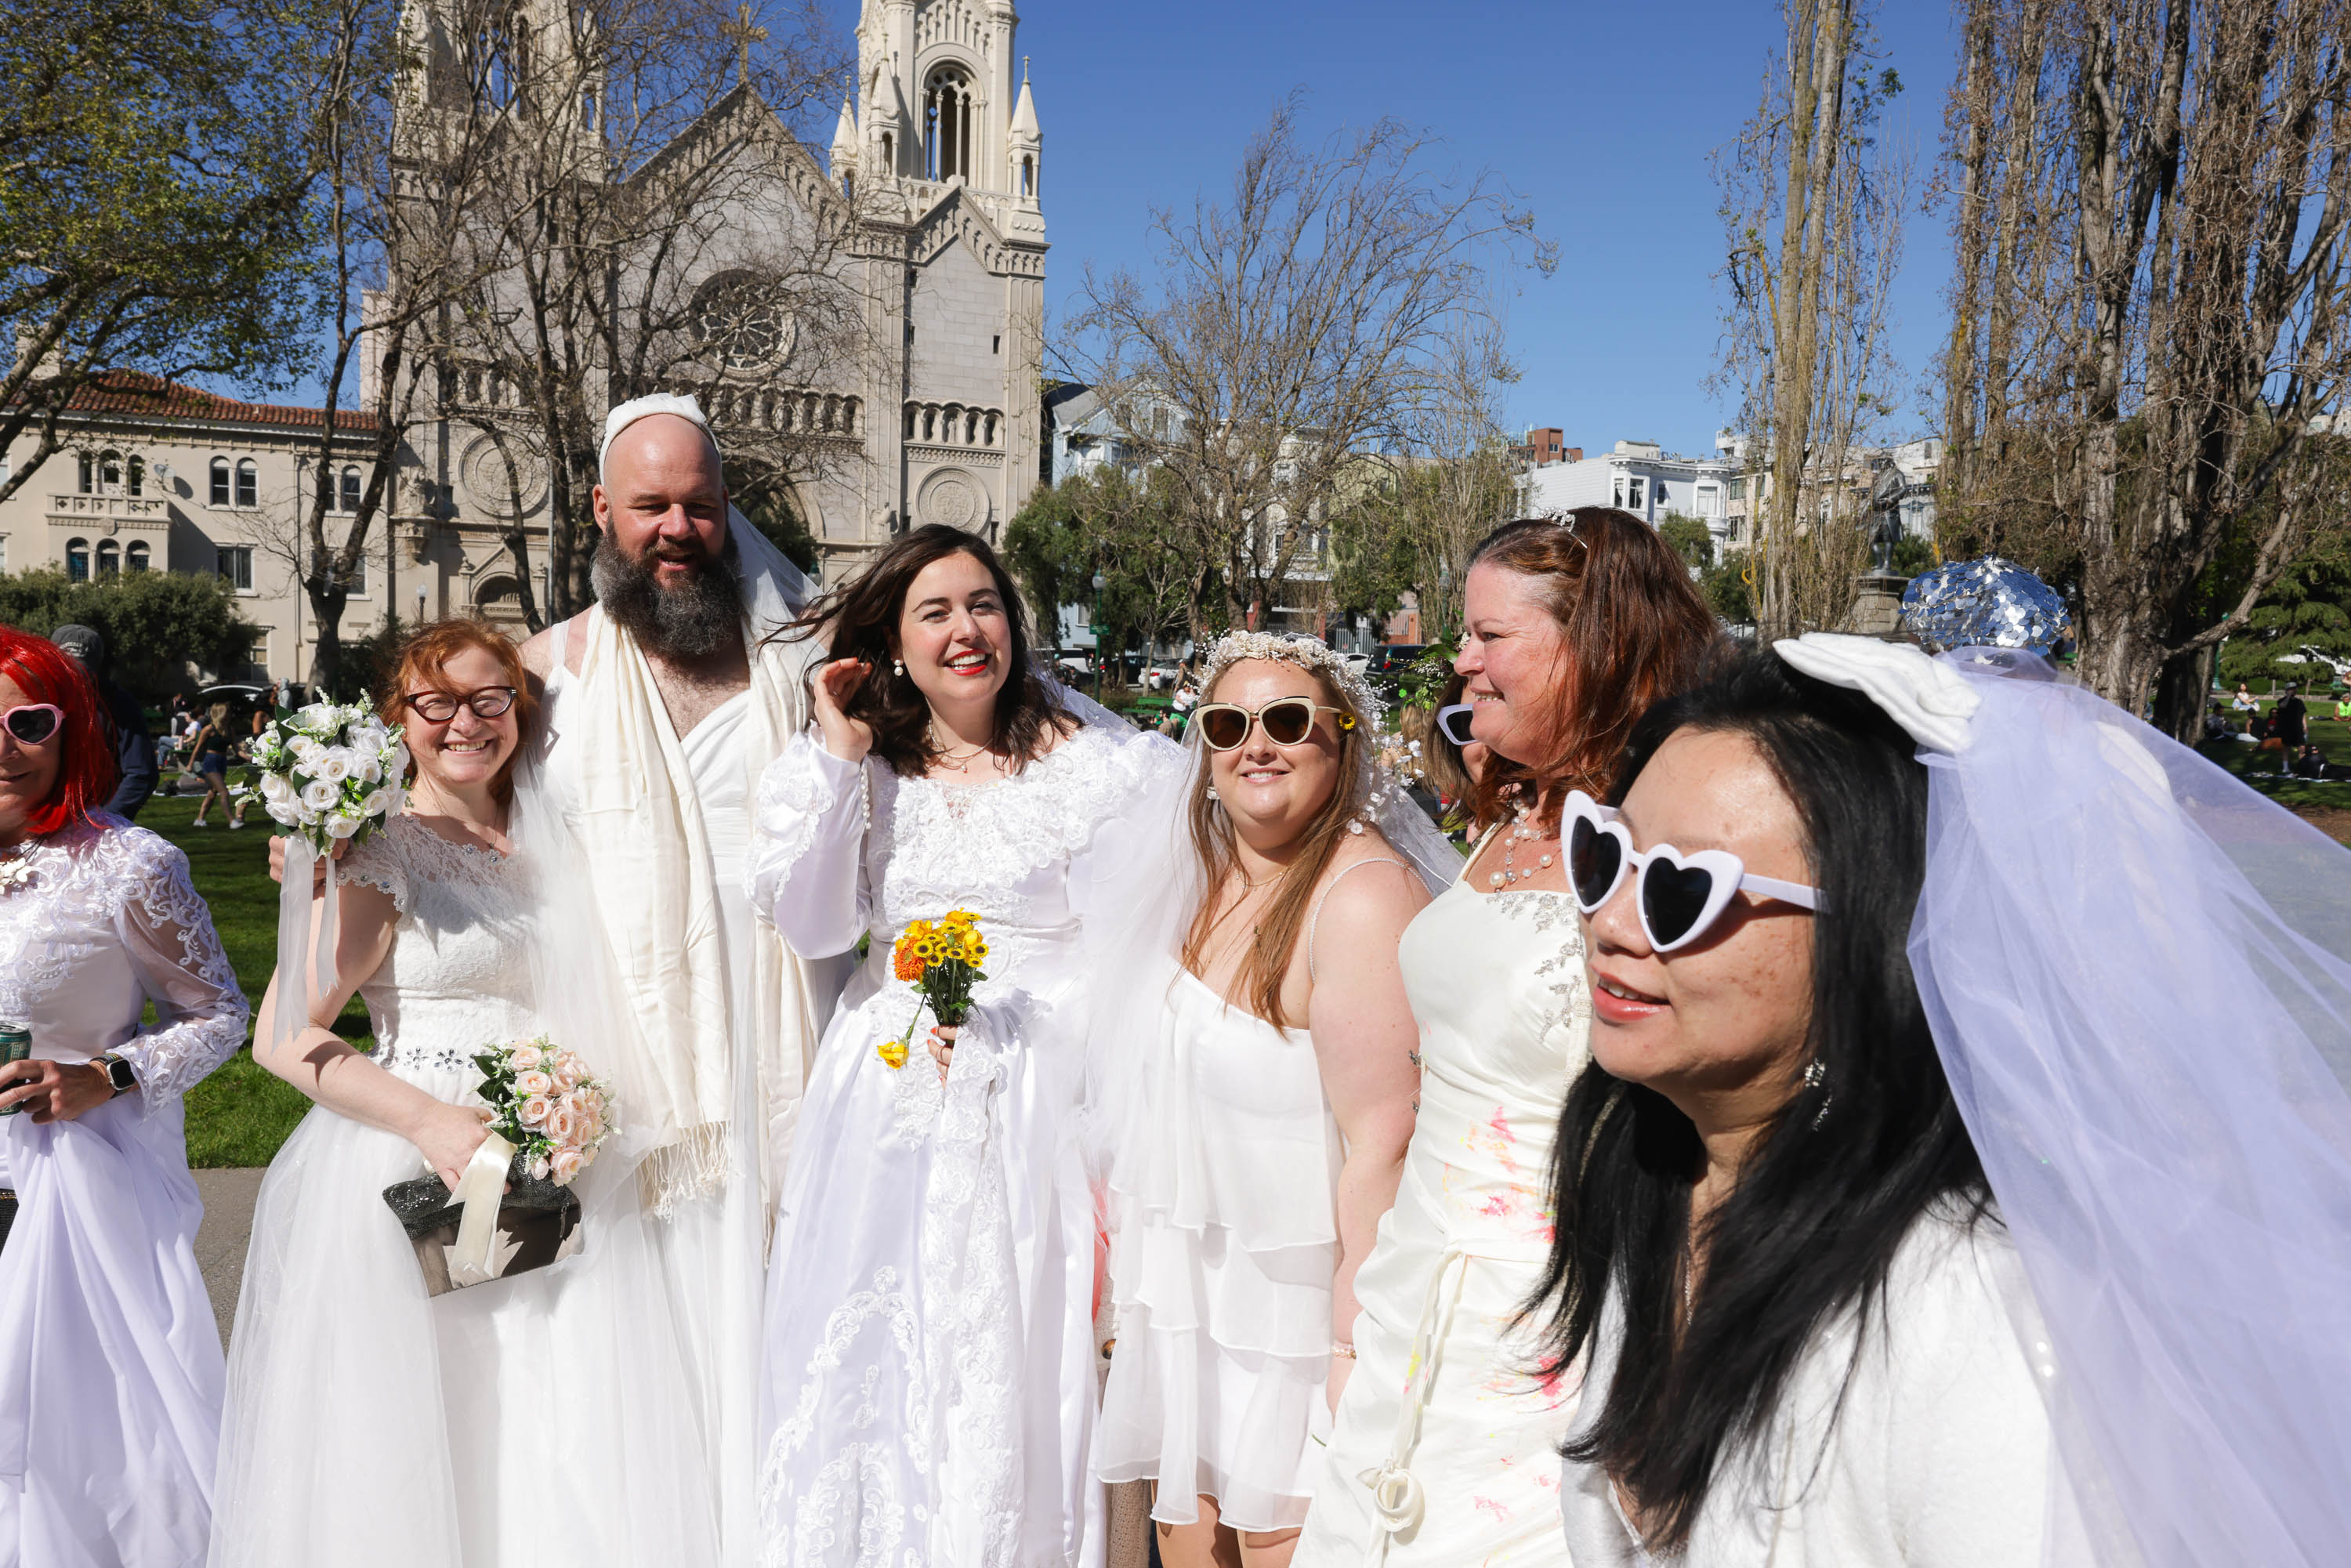 A group of people in wedding attire, smile outdoors, with a historic church in the background.